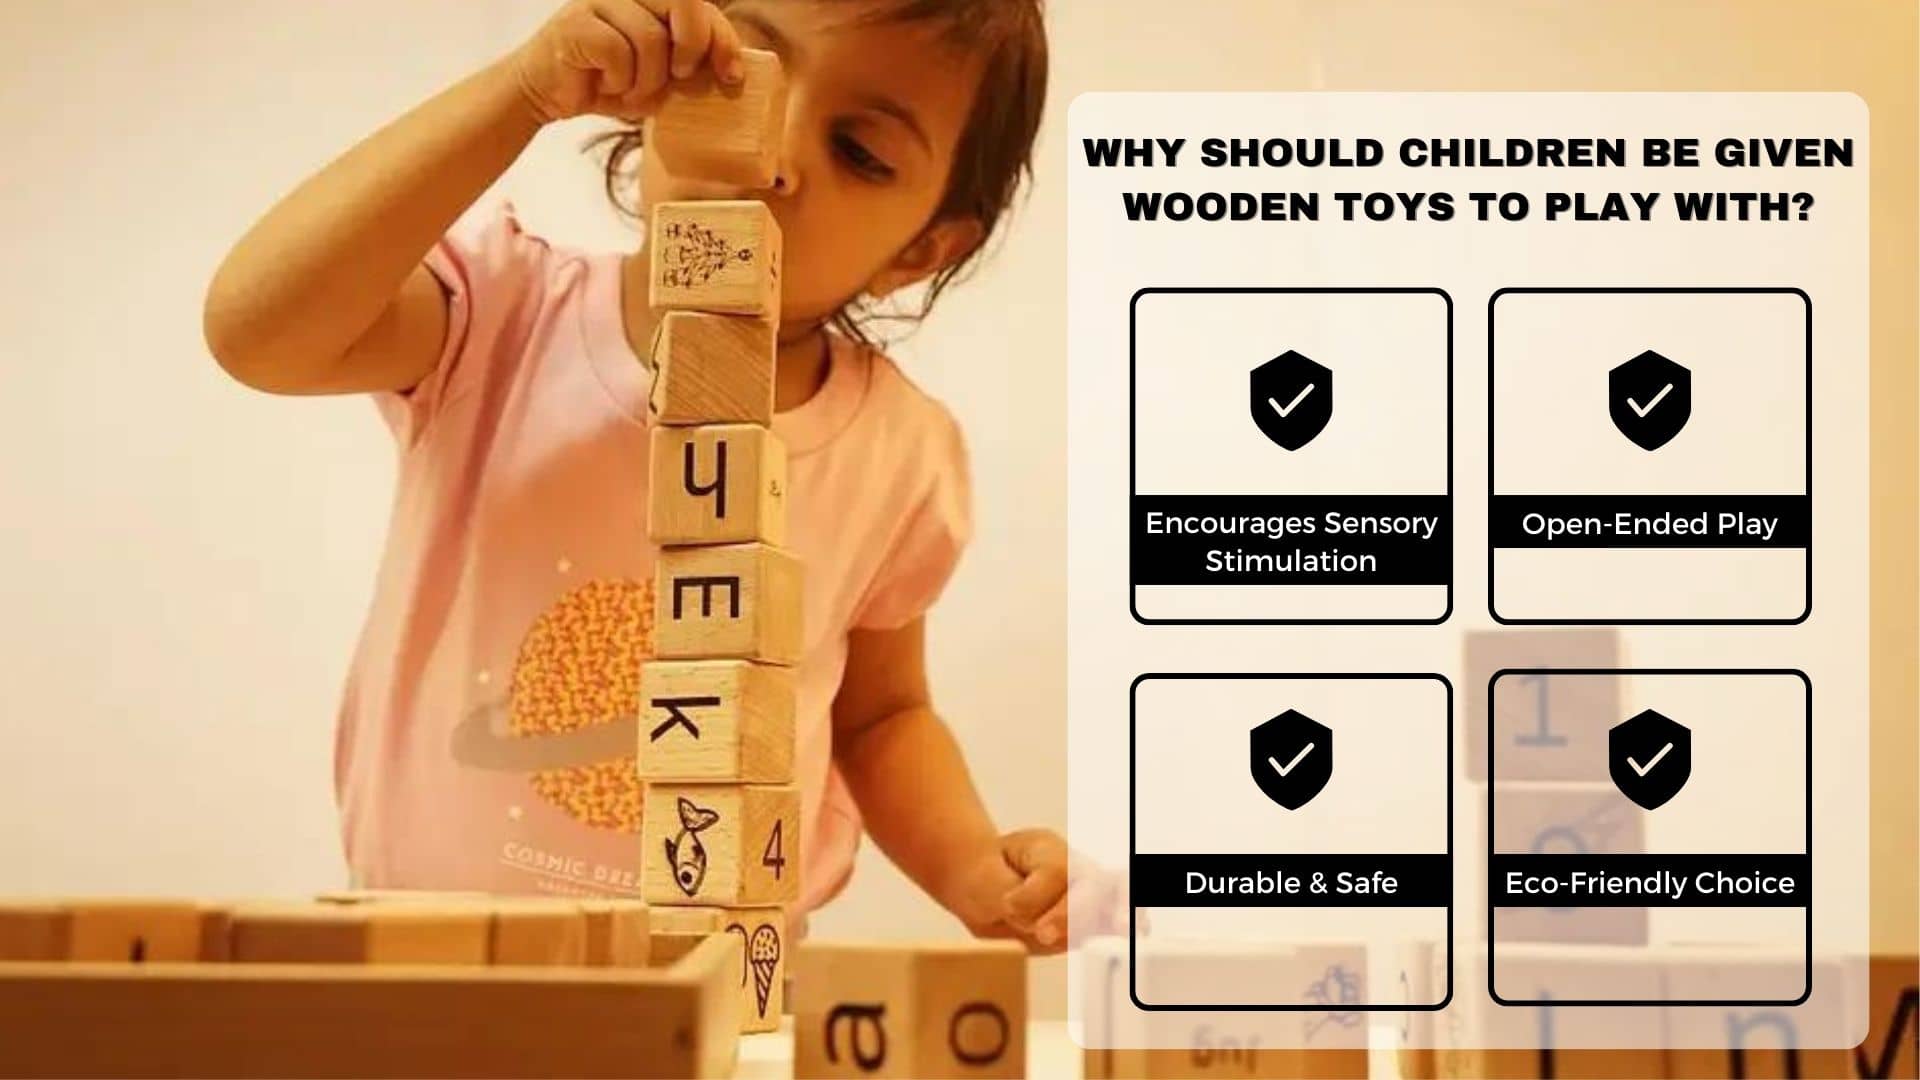 Why Should Children be Given Wooden Toys to Play With?